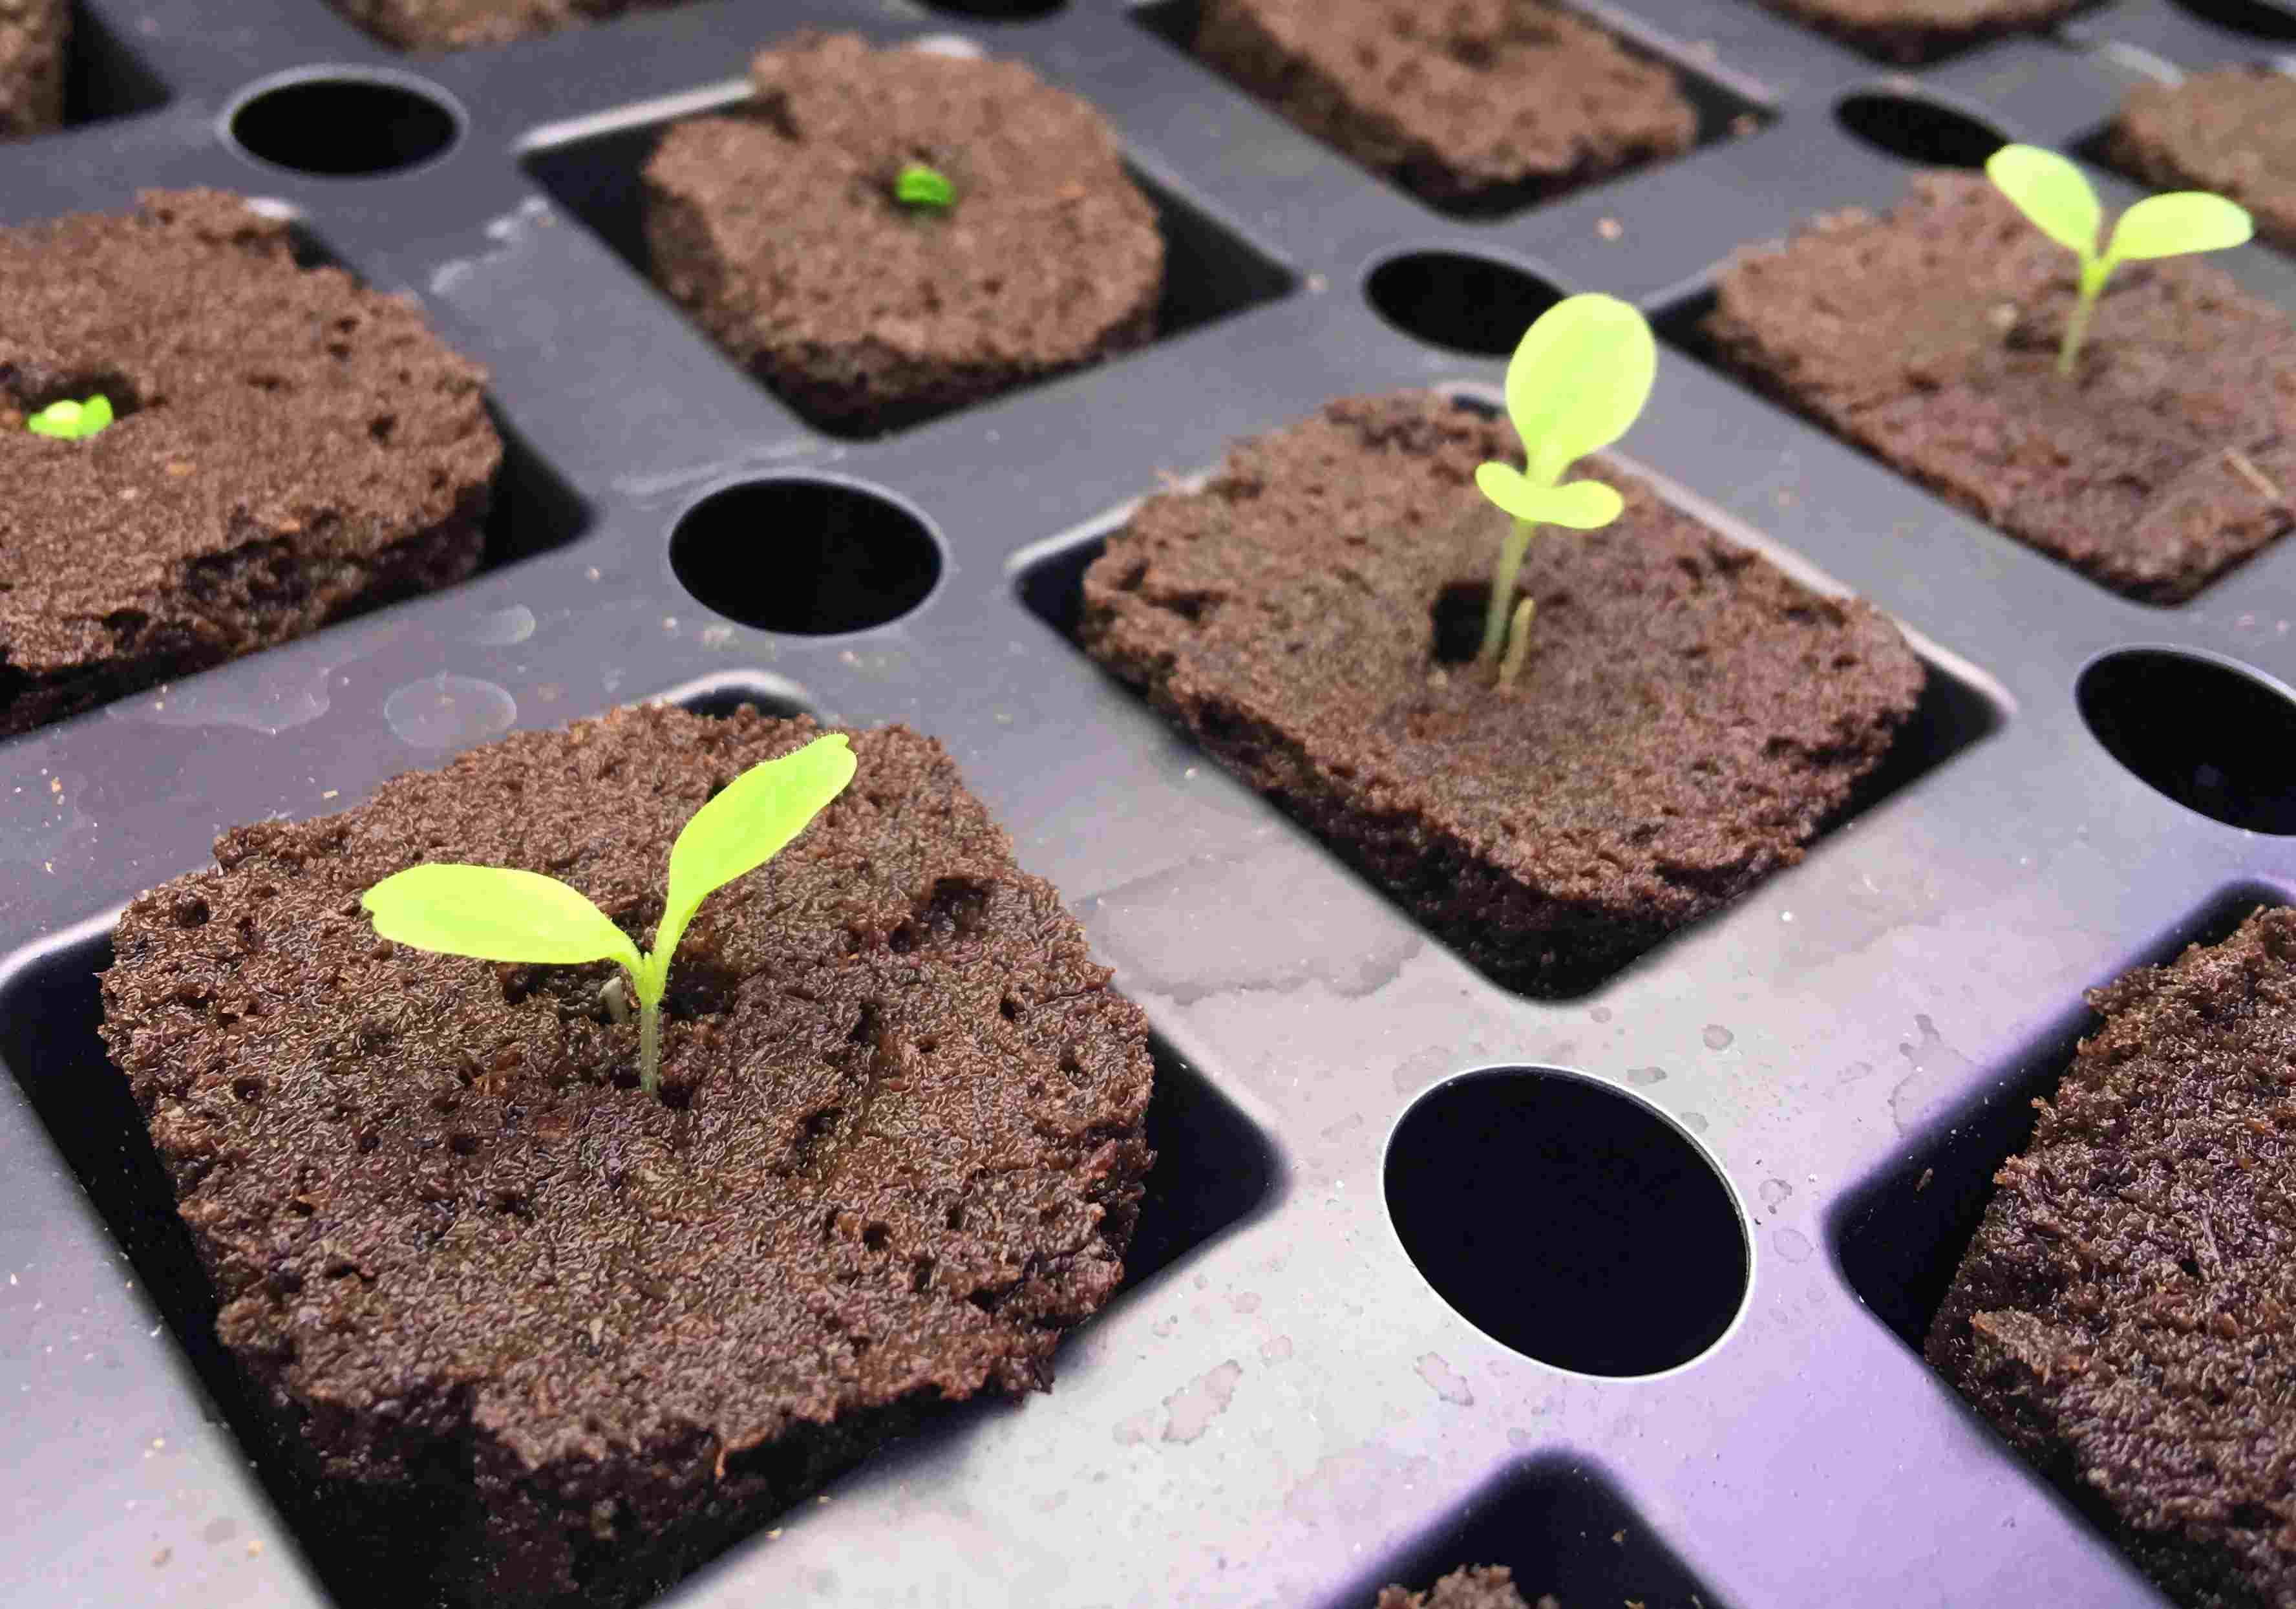 How To Germinate Seeds For Hydroponics With Rockwool